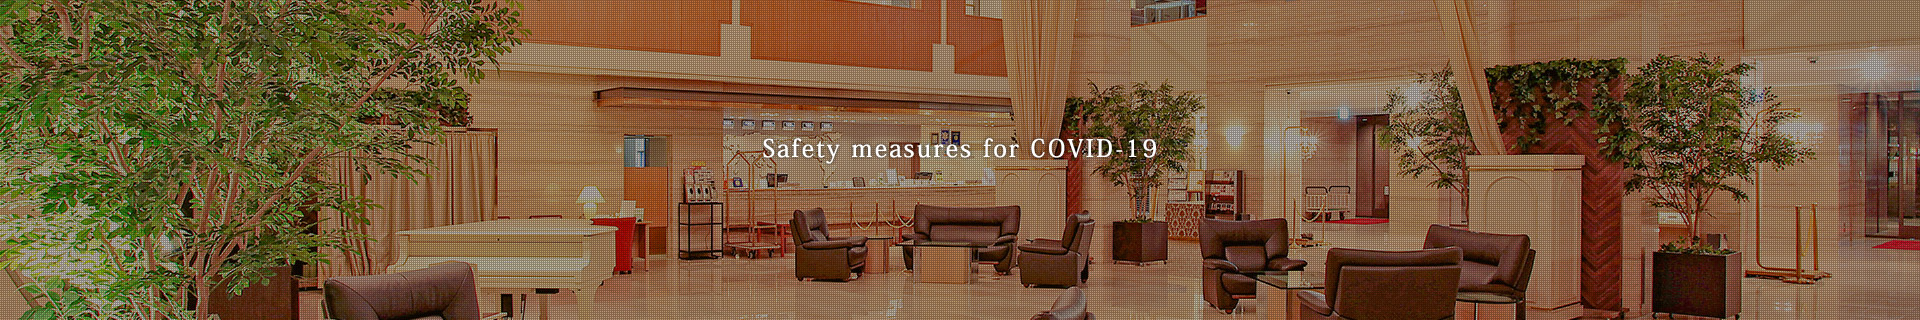 Safety measures for COVID-19